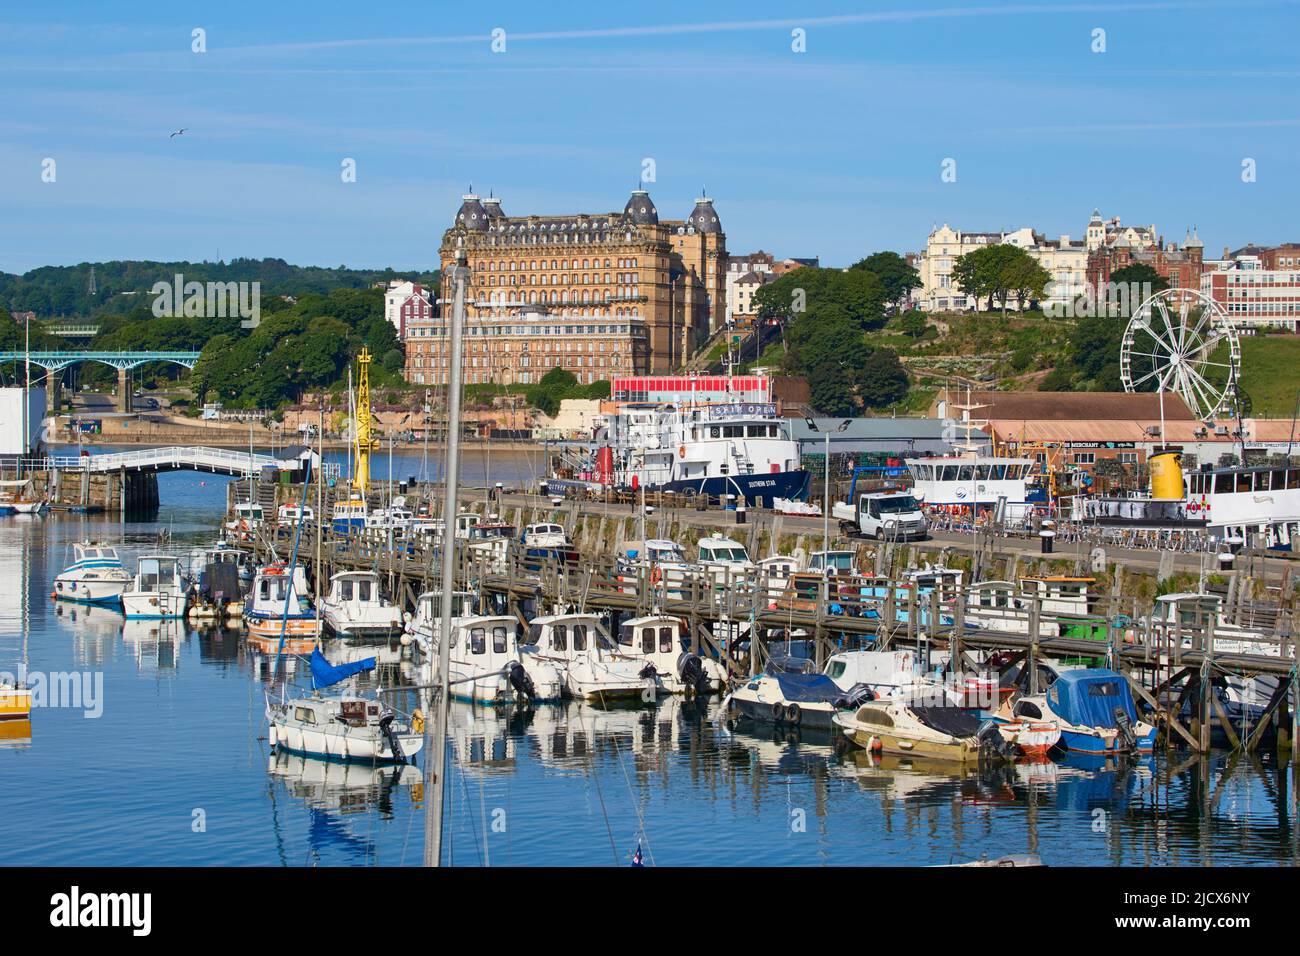 View of South Bay, looking towards Grand Hotel, Scarborough, Yorkshire, England, United Kingdom, Europe Stock Photo